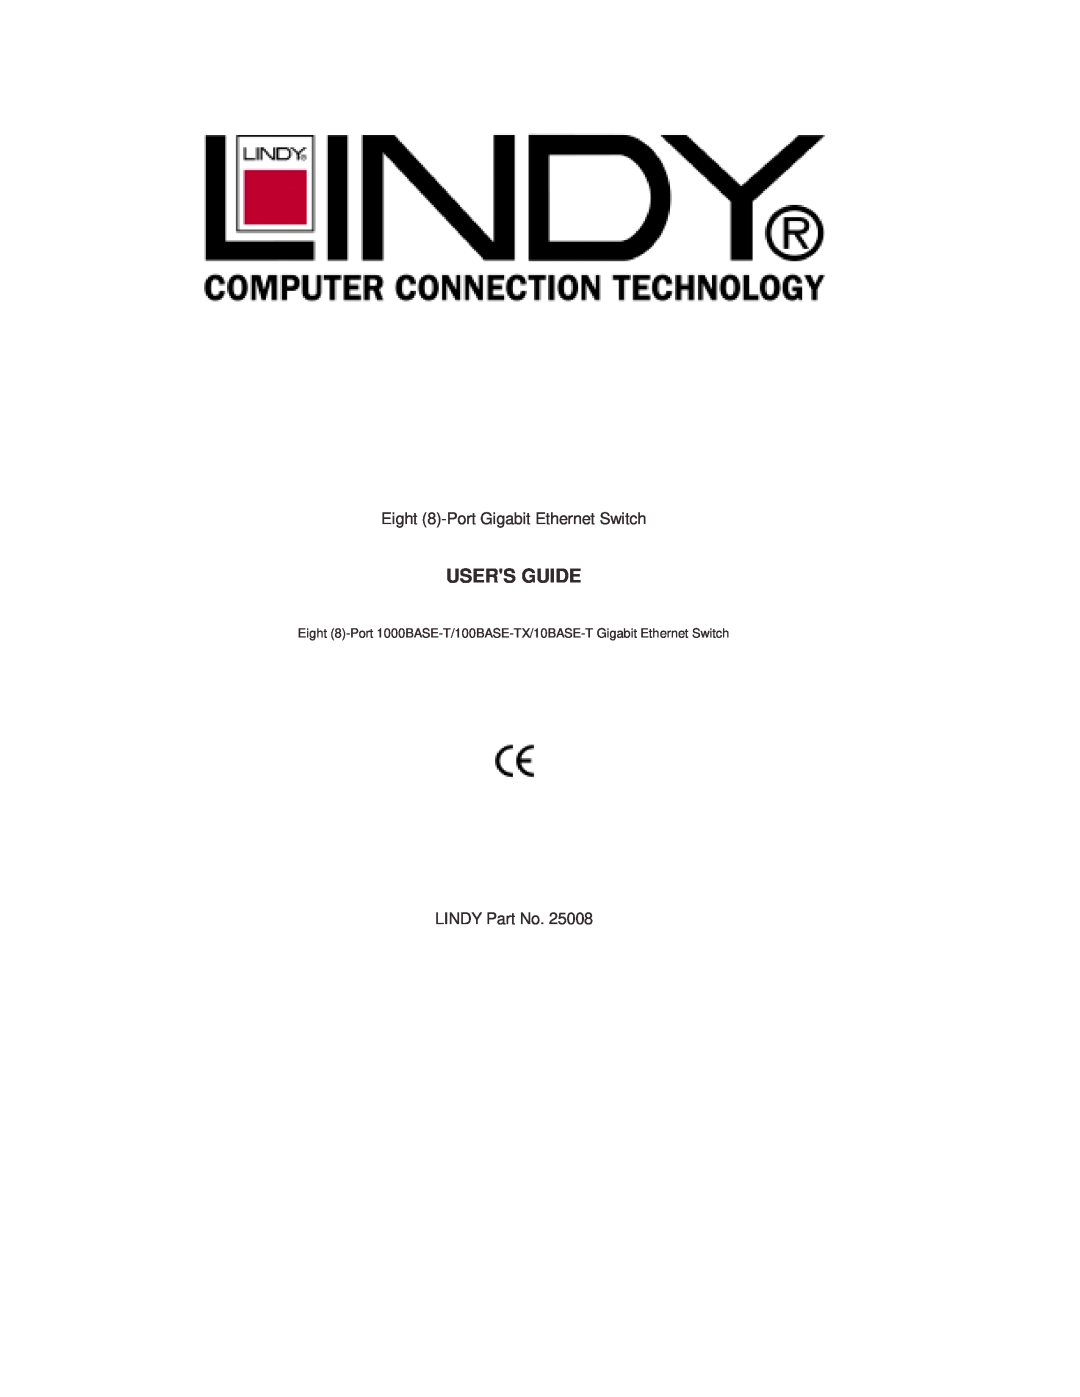 Lindy 25008 manual Users Guide, Eight 8-Port Gigabit Ethernet Switch, LINDY Part No 